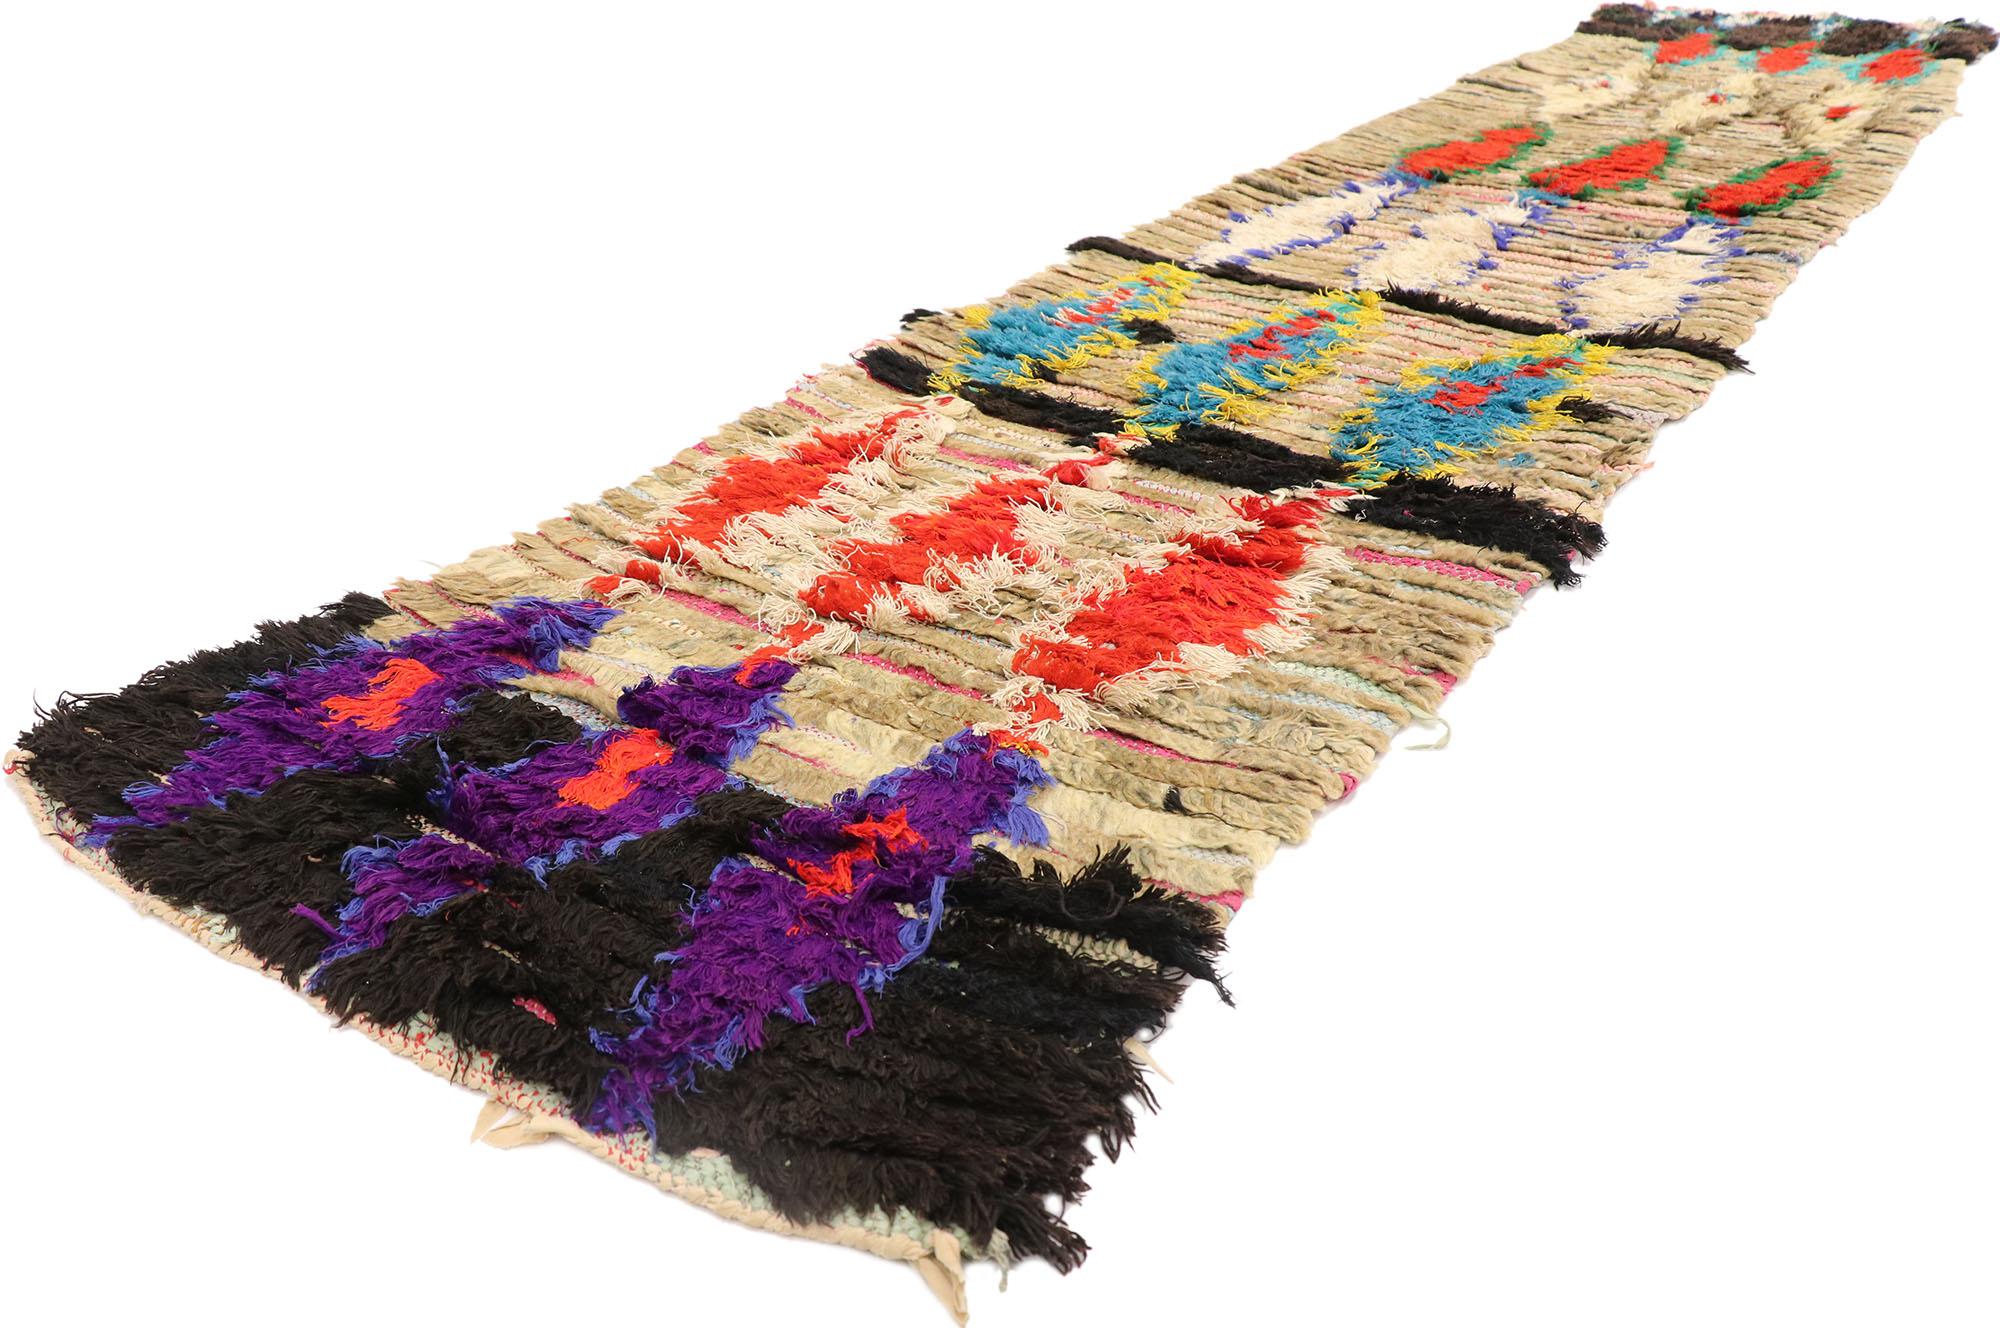 21550 Vintage Boucherouite Moroccan Azilal Rag Rug, 02'03 x 10'01. Azilal rag rugs, also known as Azilal Boucherouite rugs, embody sustainable craftsmanship originating from the Azilal region in the Atlas Mountains of Morocco. Crafted by talented